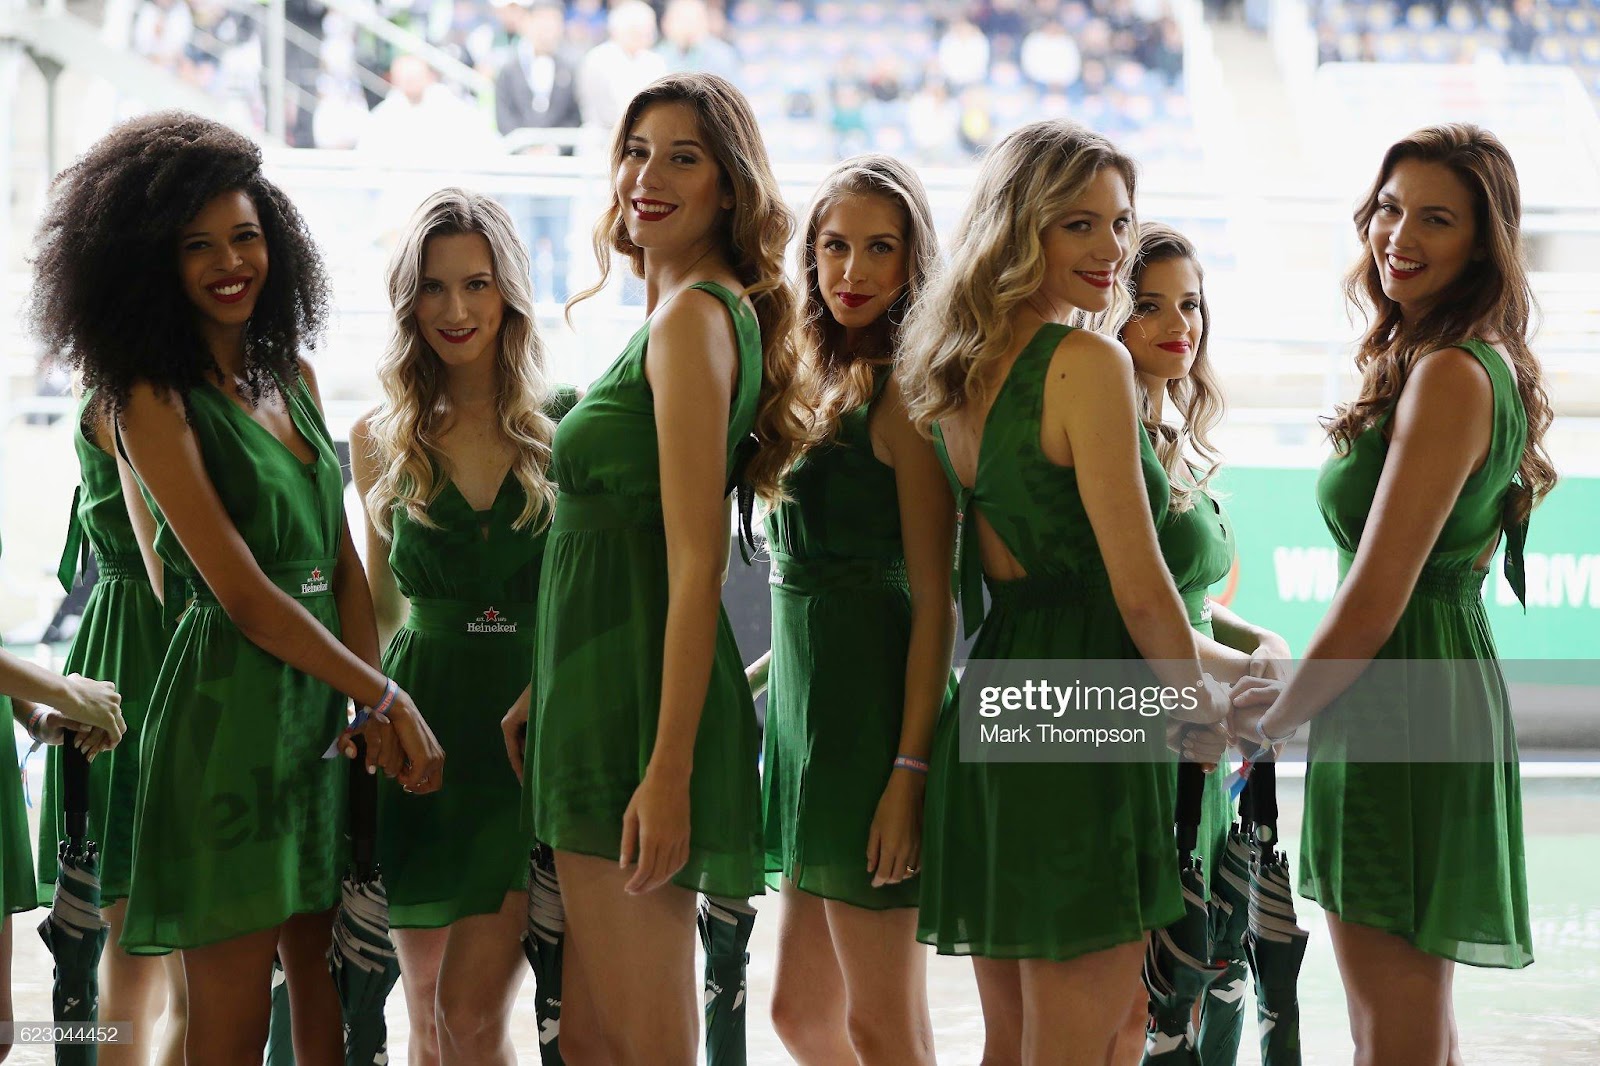 D:\Documenti\posts\posts\Women and motorsport\foto\Getty e altre\heineken-grid-girls-before-the-formula-one-grand-prix-of-brazil-at-picture-id623044452.jpg